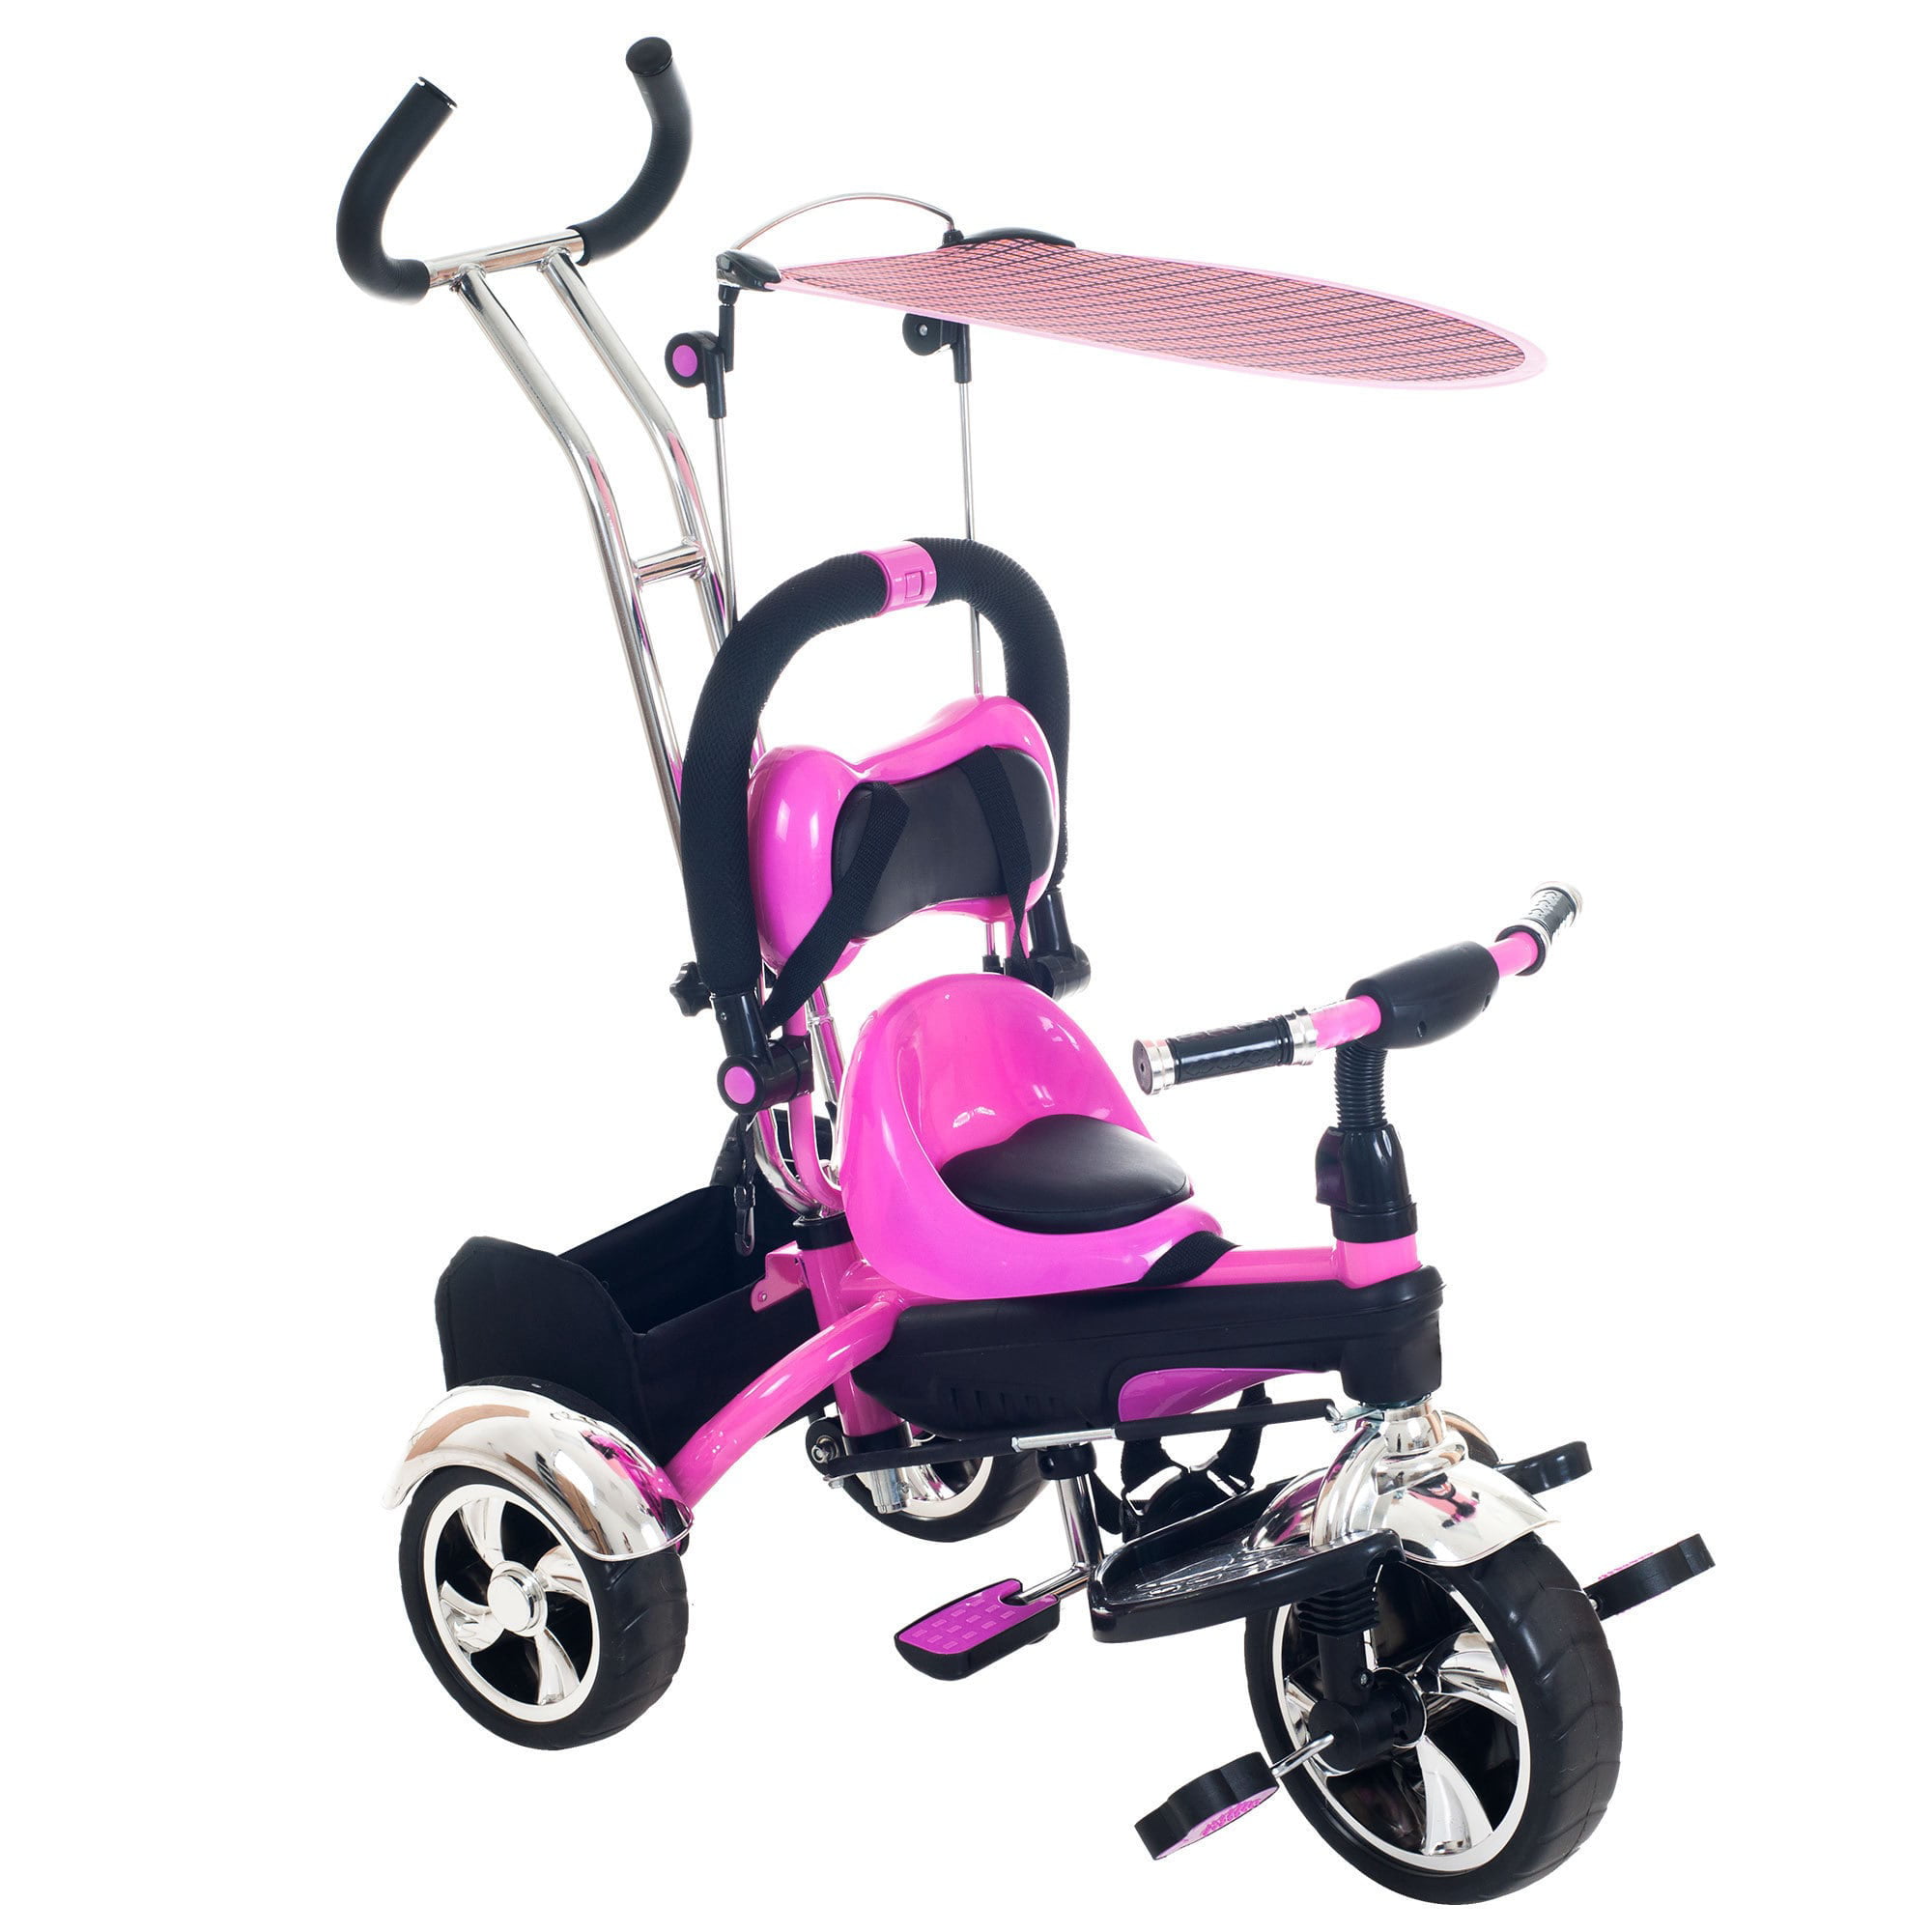 toy stroller for 1 year old